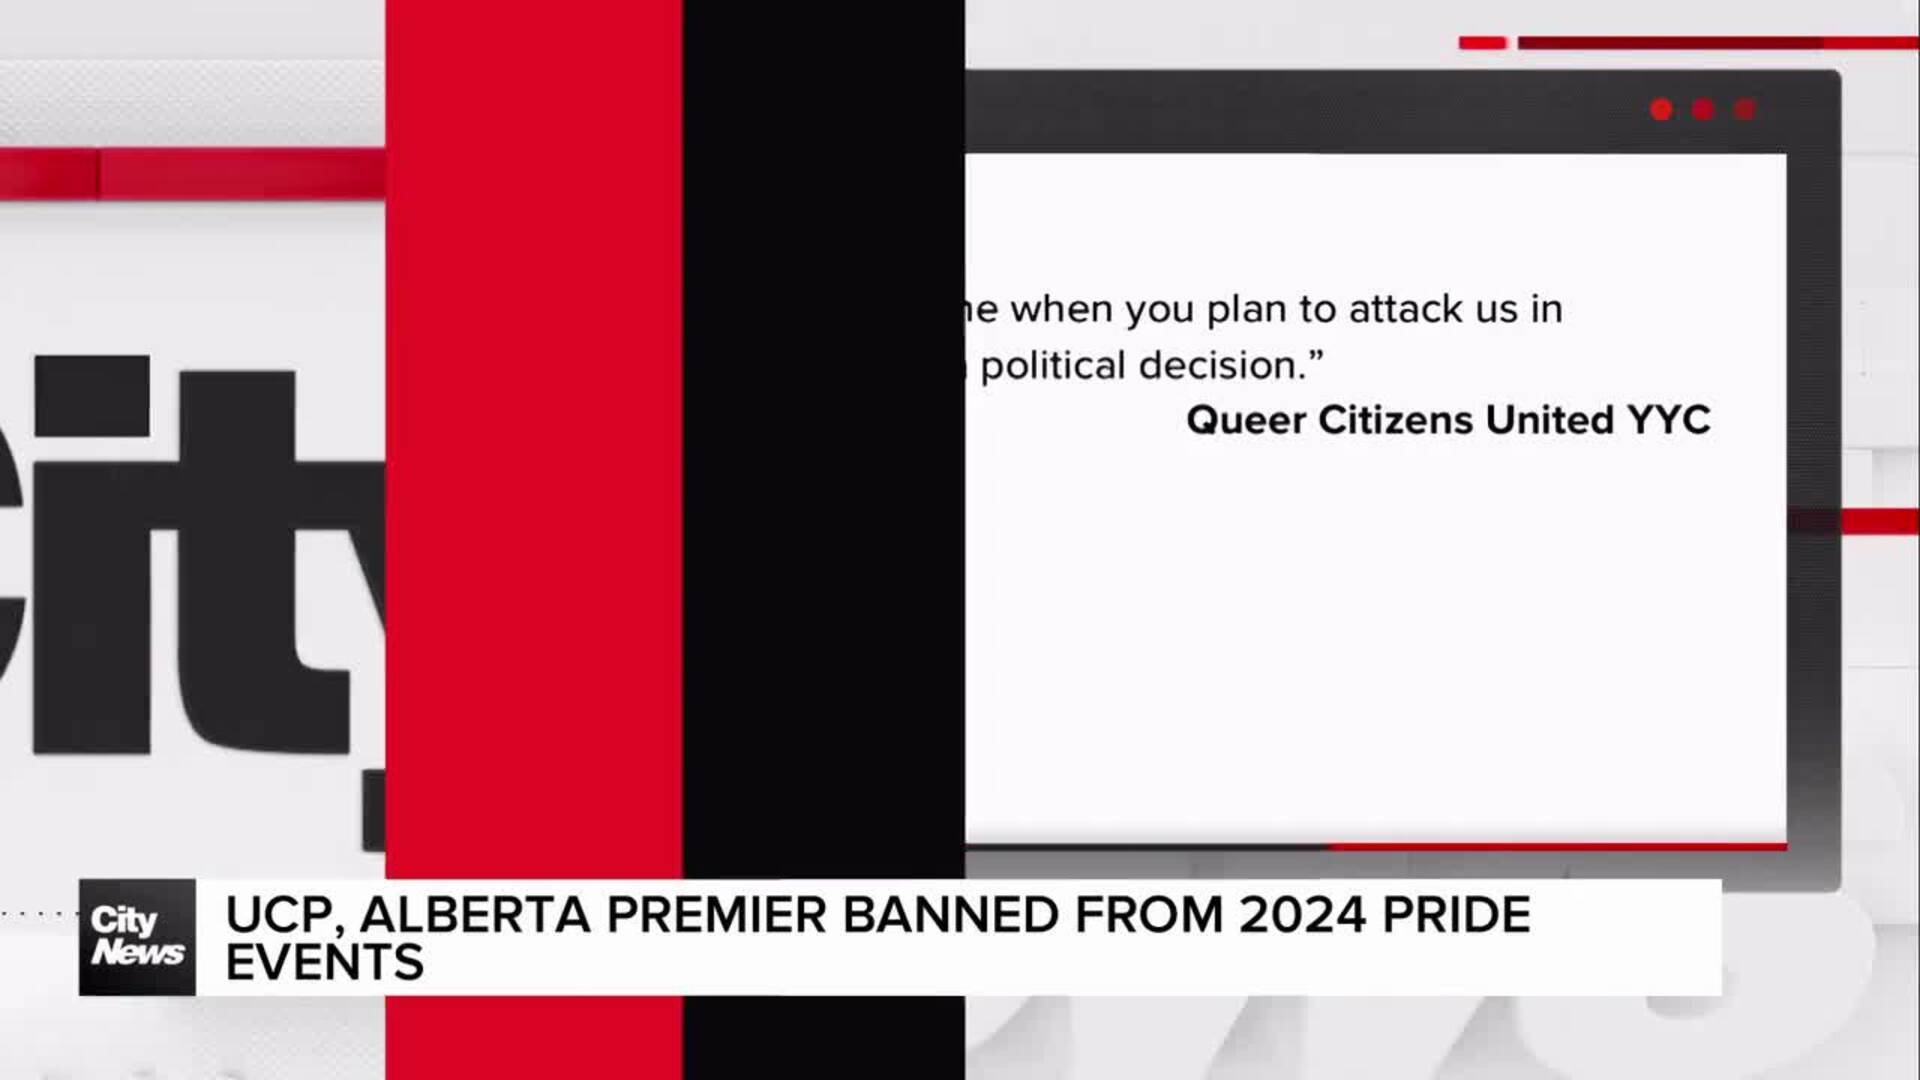 UCP, Alberta Premier banned from 2024 Pride events